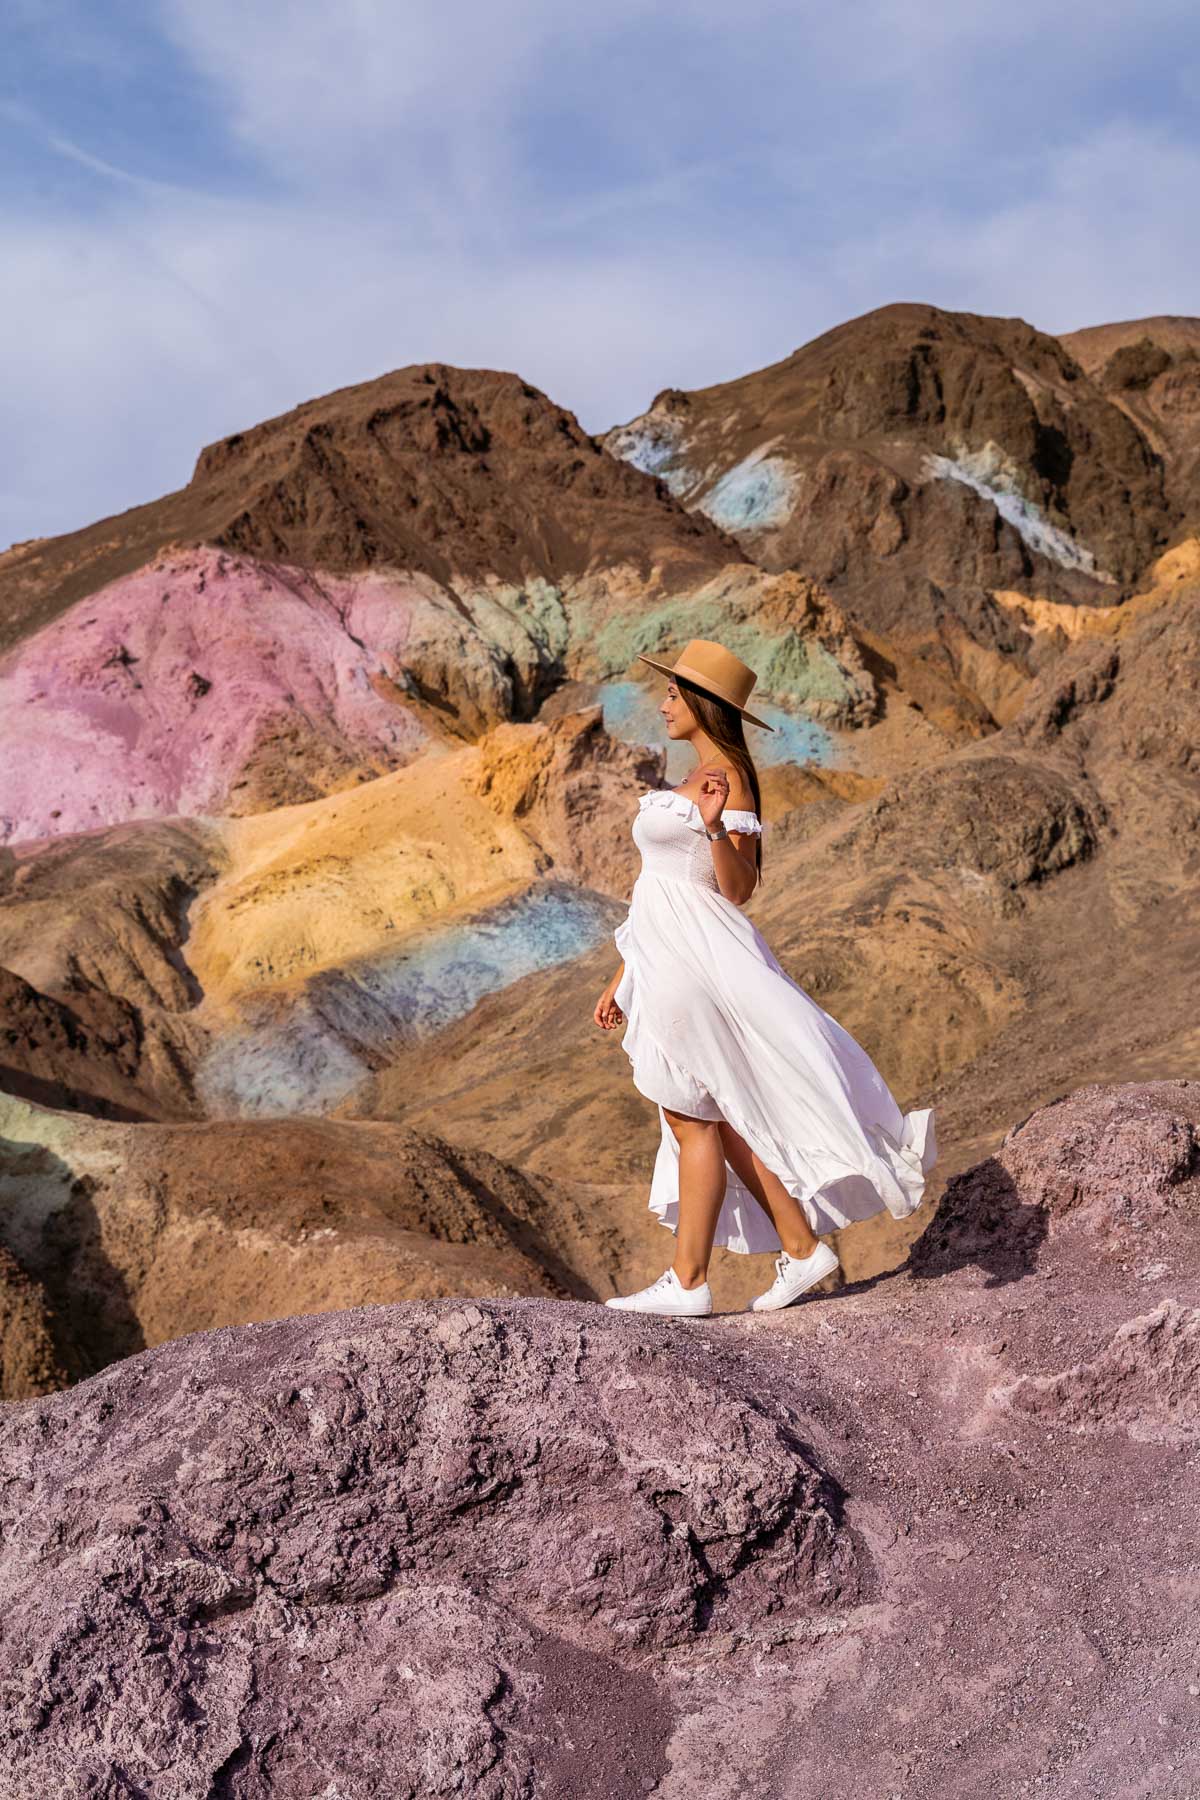 Girl in white dress at the The colorful rocks at Artist's Palette, Death Valley National Park